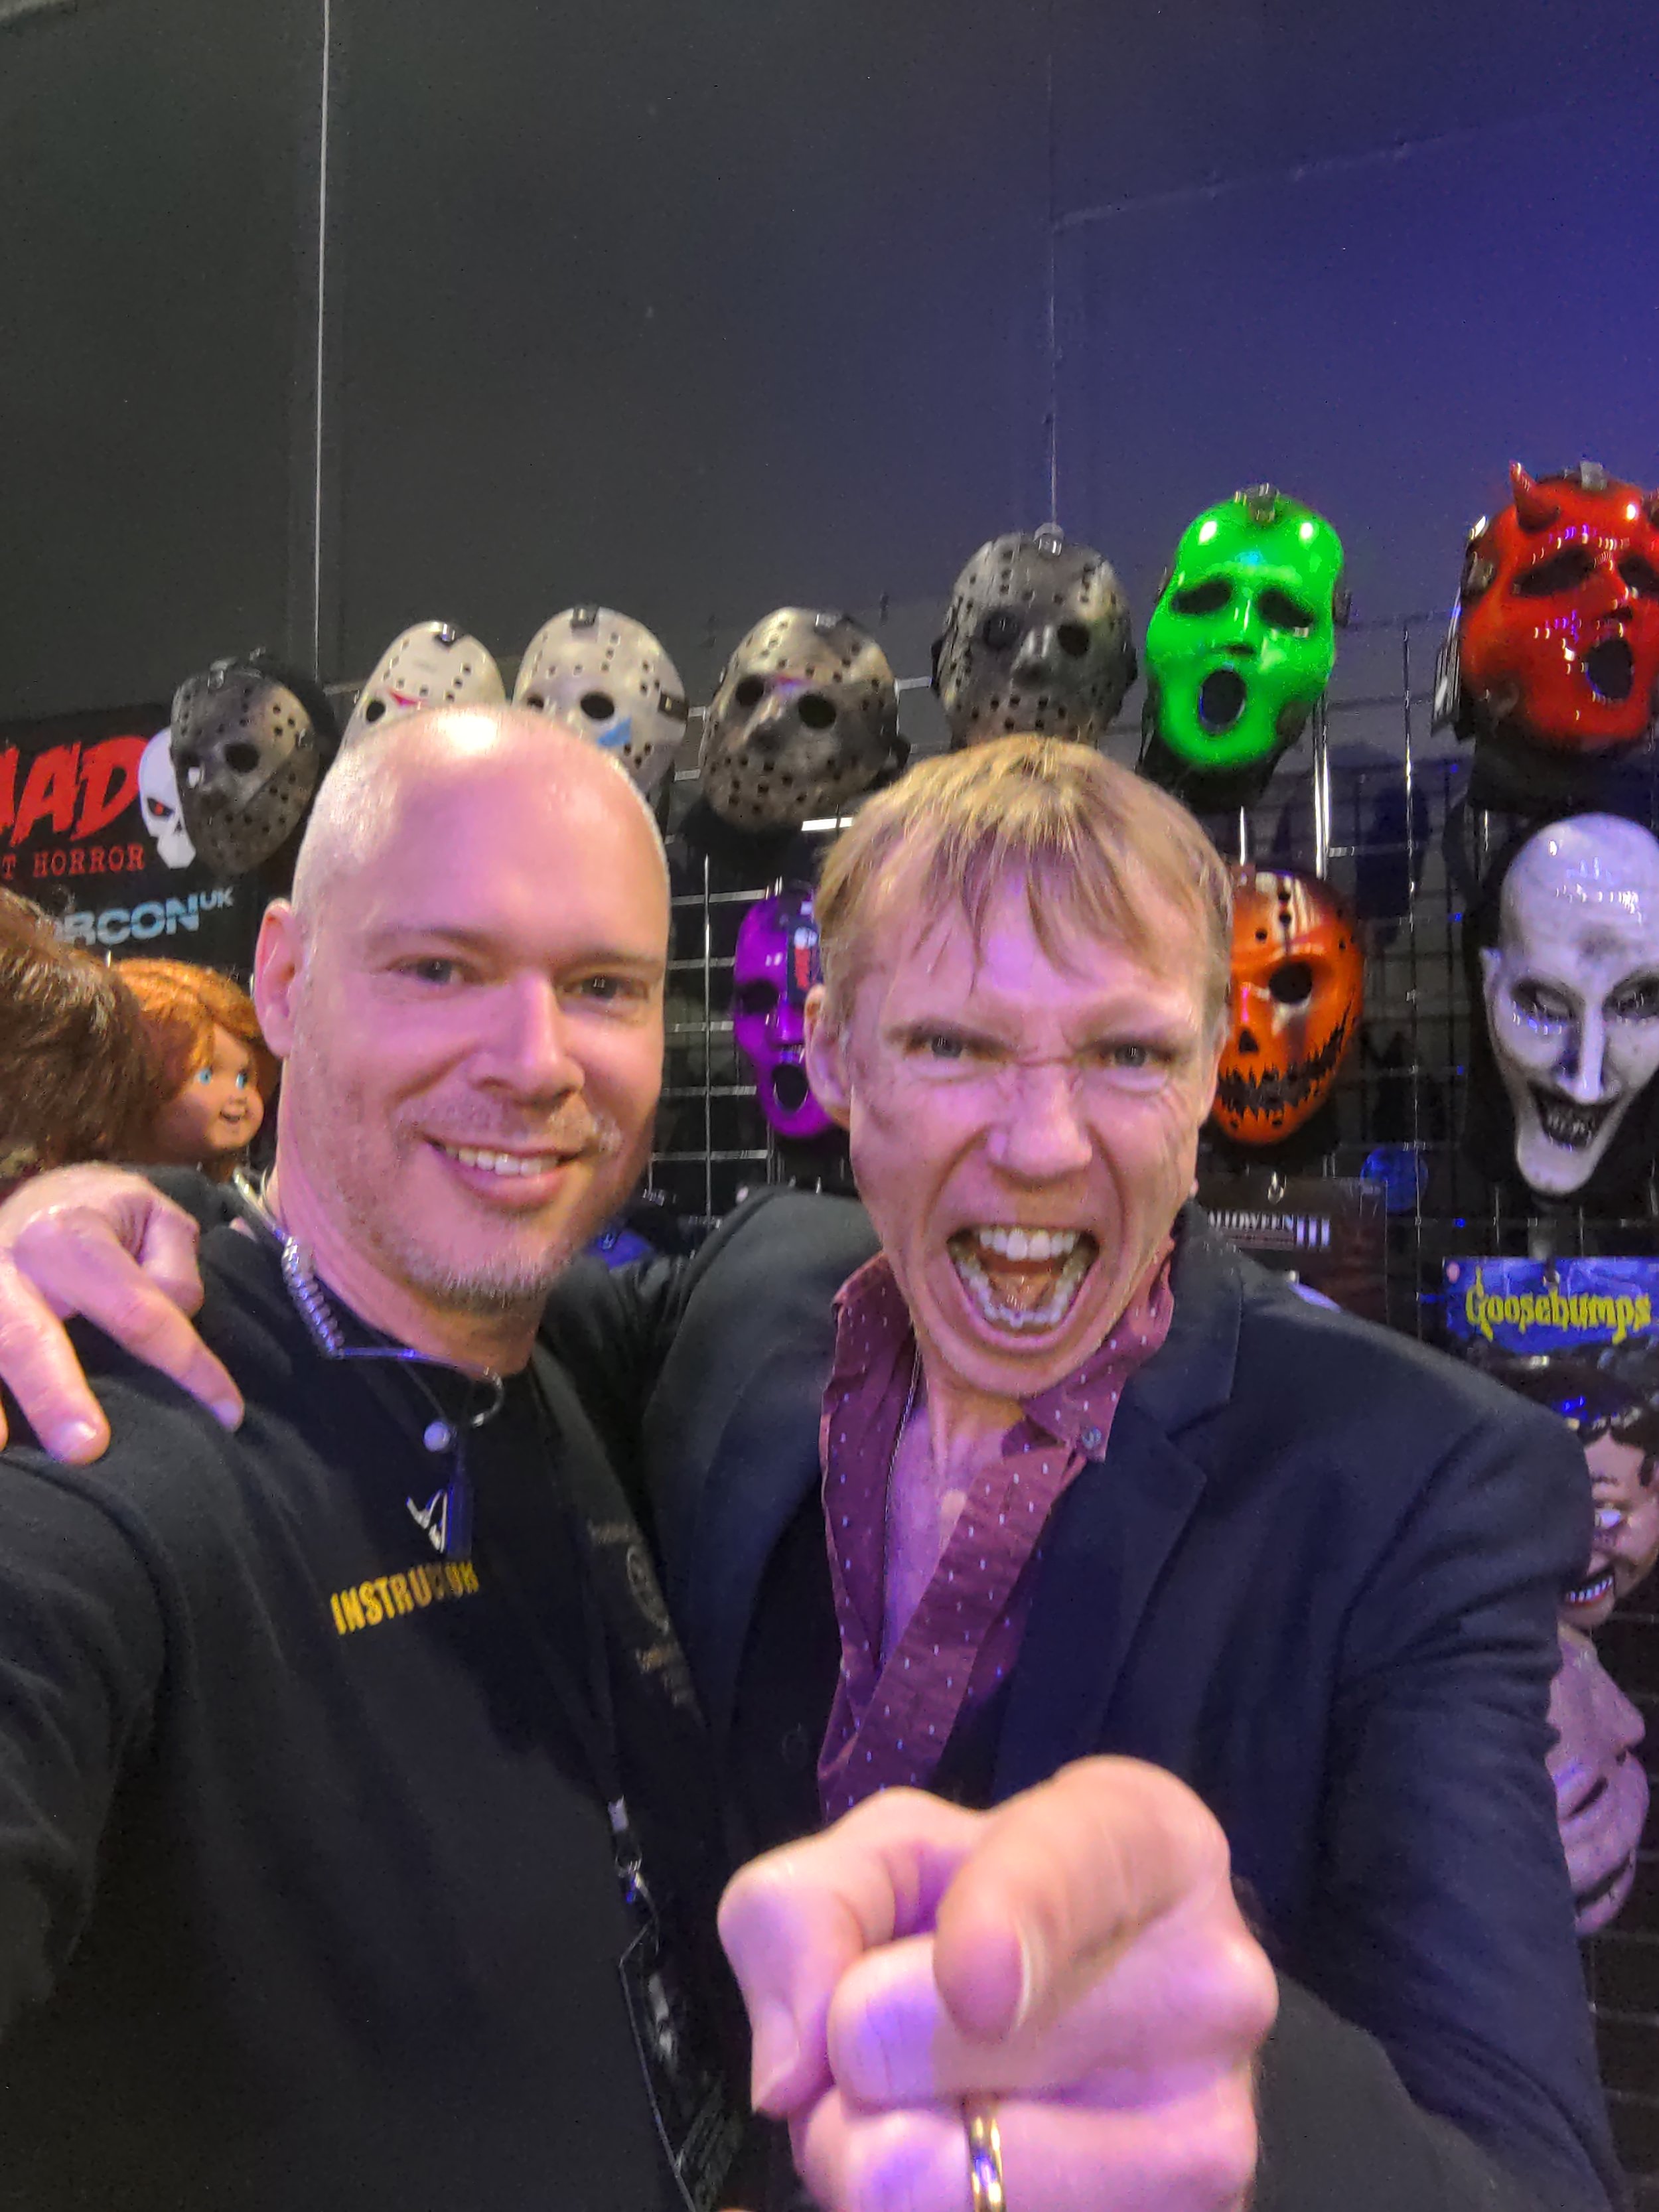 With Richard Brake (Game of Thrones, The Night King)